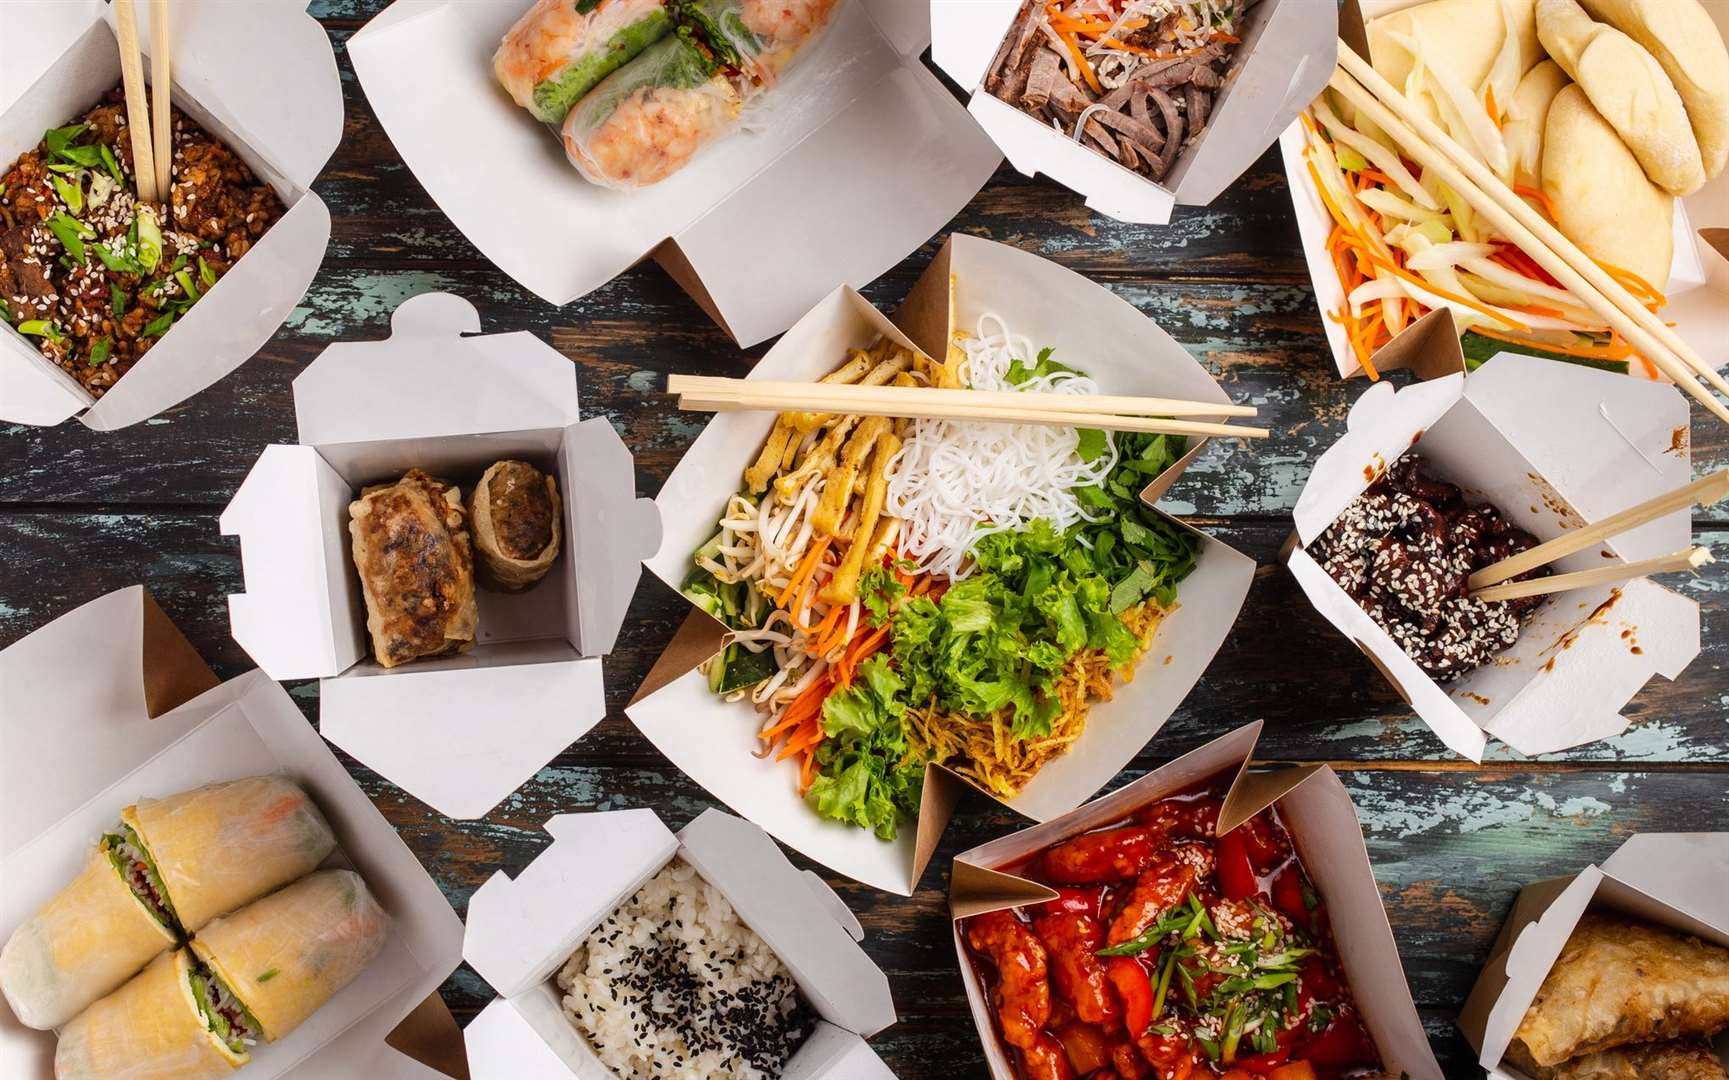 Takeaway businesses will now need to think harder about the packaging they use. Image: iStock.